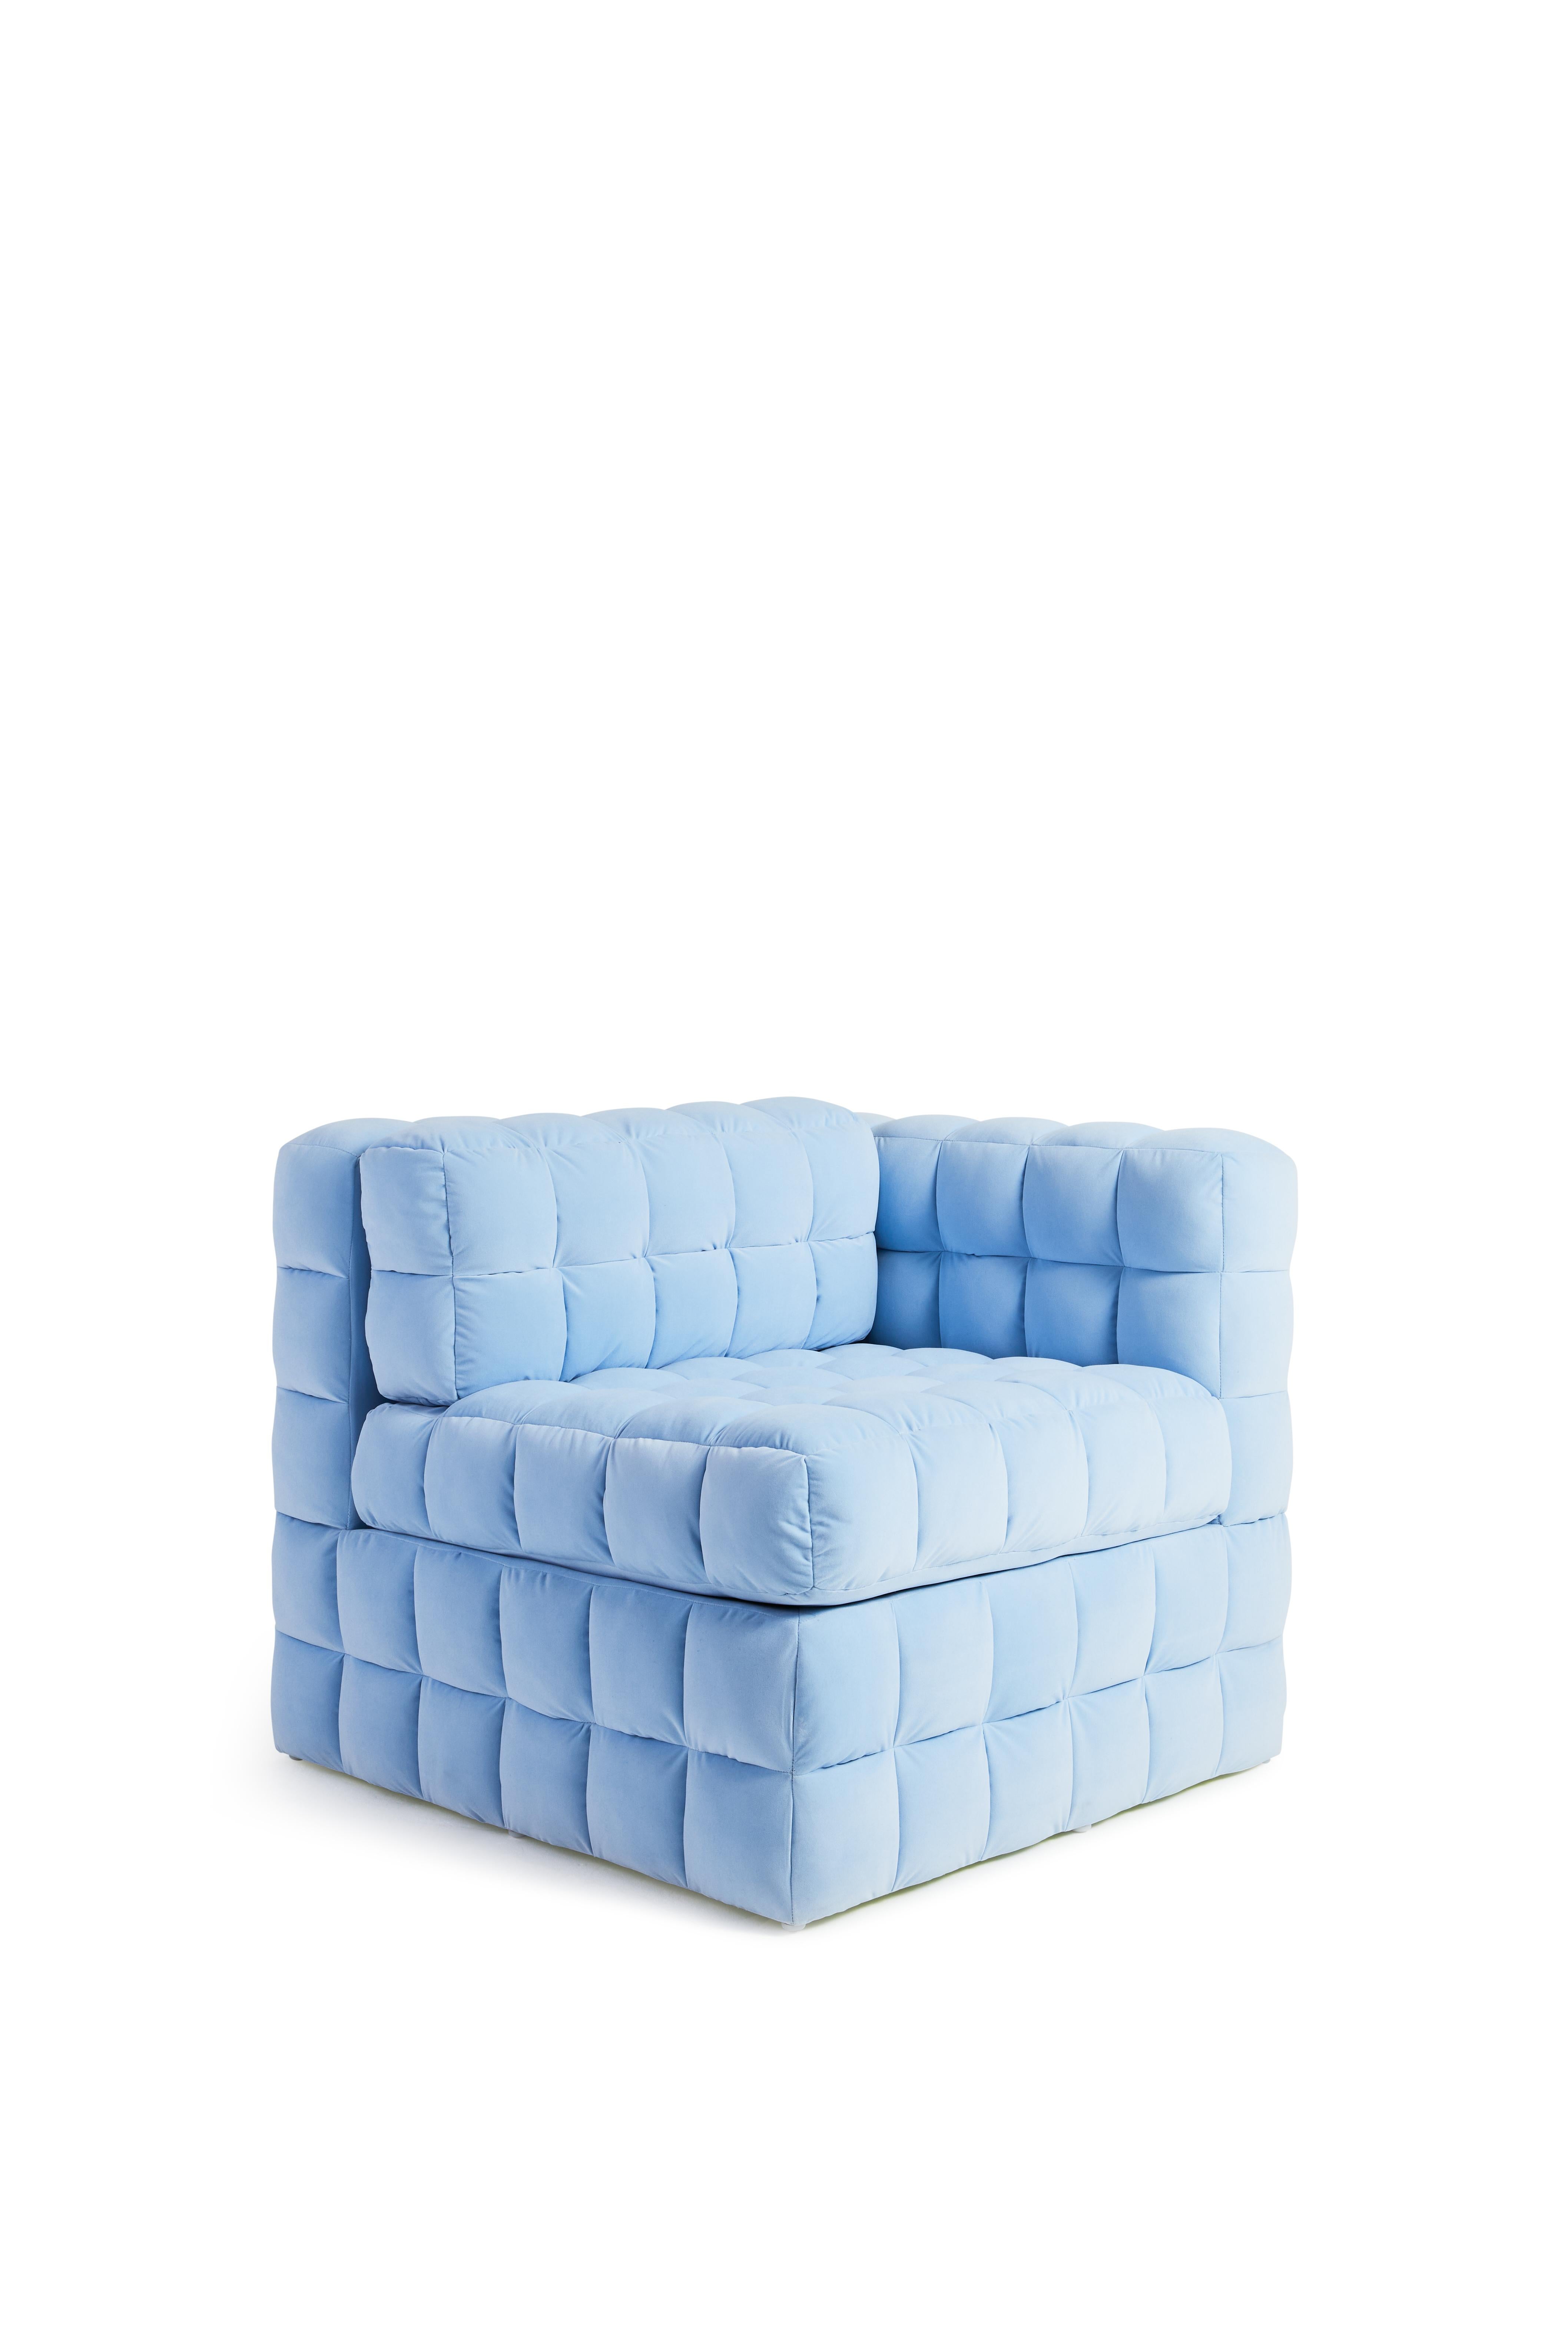 The Modular Ambrose club chair modernizes the quilted craft by eliminating the patchwork and increasing the puff. This chair features a hand-tied spring base. This chair is comfortable yet tailored. Each puff is hand stuffed and formed. This club